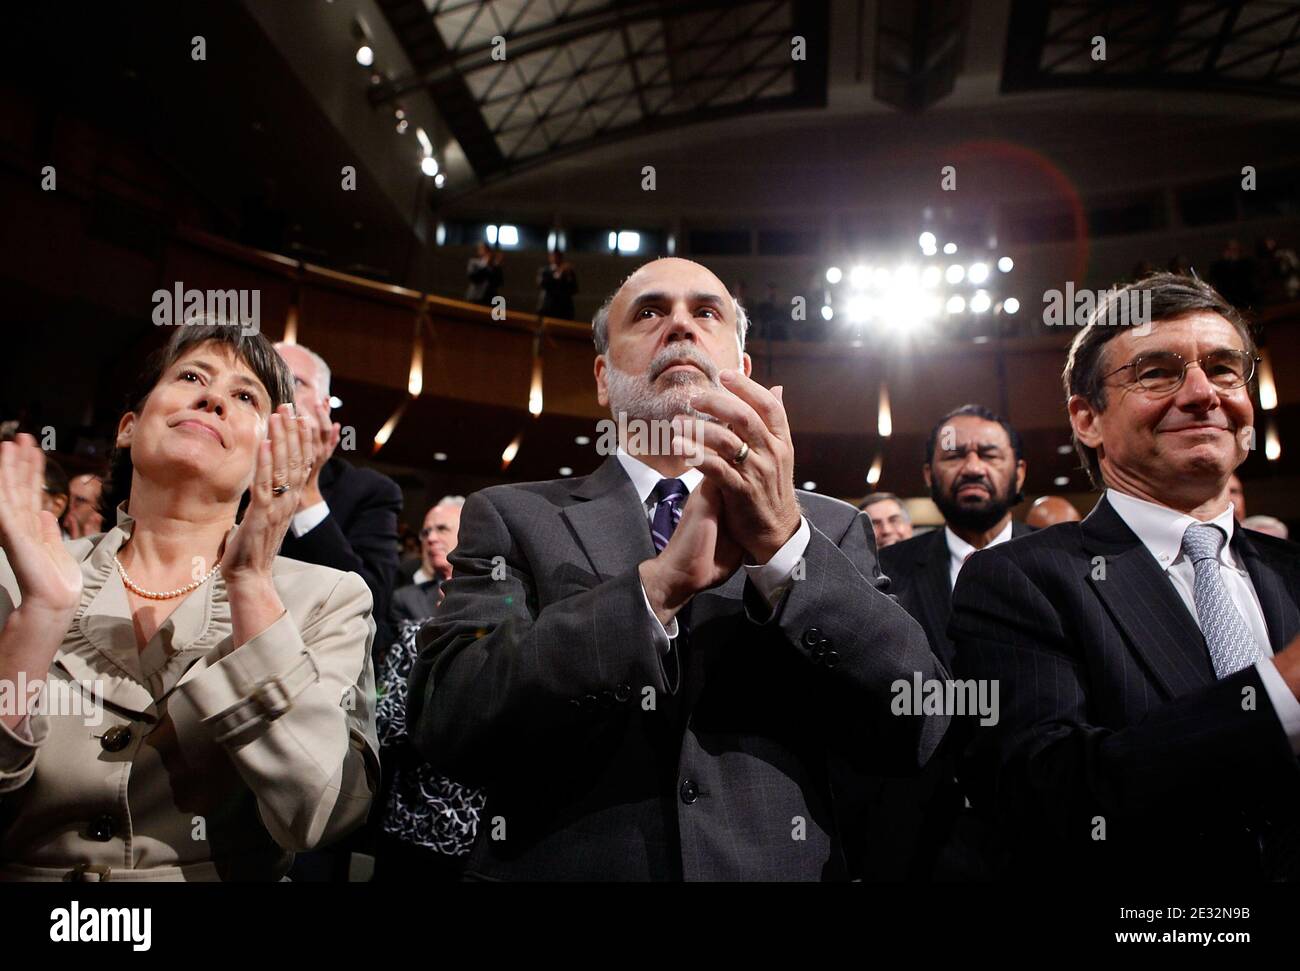 "(L-R) FDIC Chair Sheila Bair, Federal Reserve Bank Chairman Ben Bernanke and California Public EmployeesÀ Retirement System Chief Investment Officer Joseph Dear applaud as U.S. President Barack Obama signs the the financial reform bill into law during a ceremony at the Ronald Reagan Building and International Trade Center July 21, 2010 in Washington, DC. A sweeping expansion of federal financial regulation in the wake of the worst recession since the Great Depression, the bill will create a consumer protection agency, lay out a blueprint for disassembling financial entities considered ""too b Stock Photo